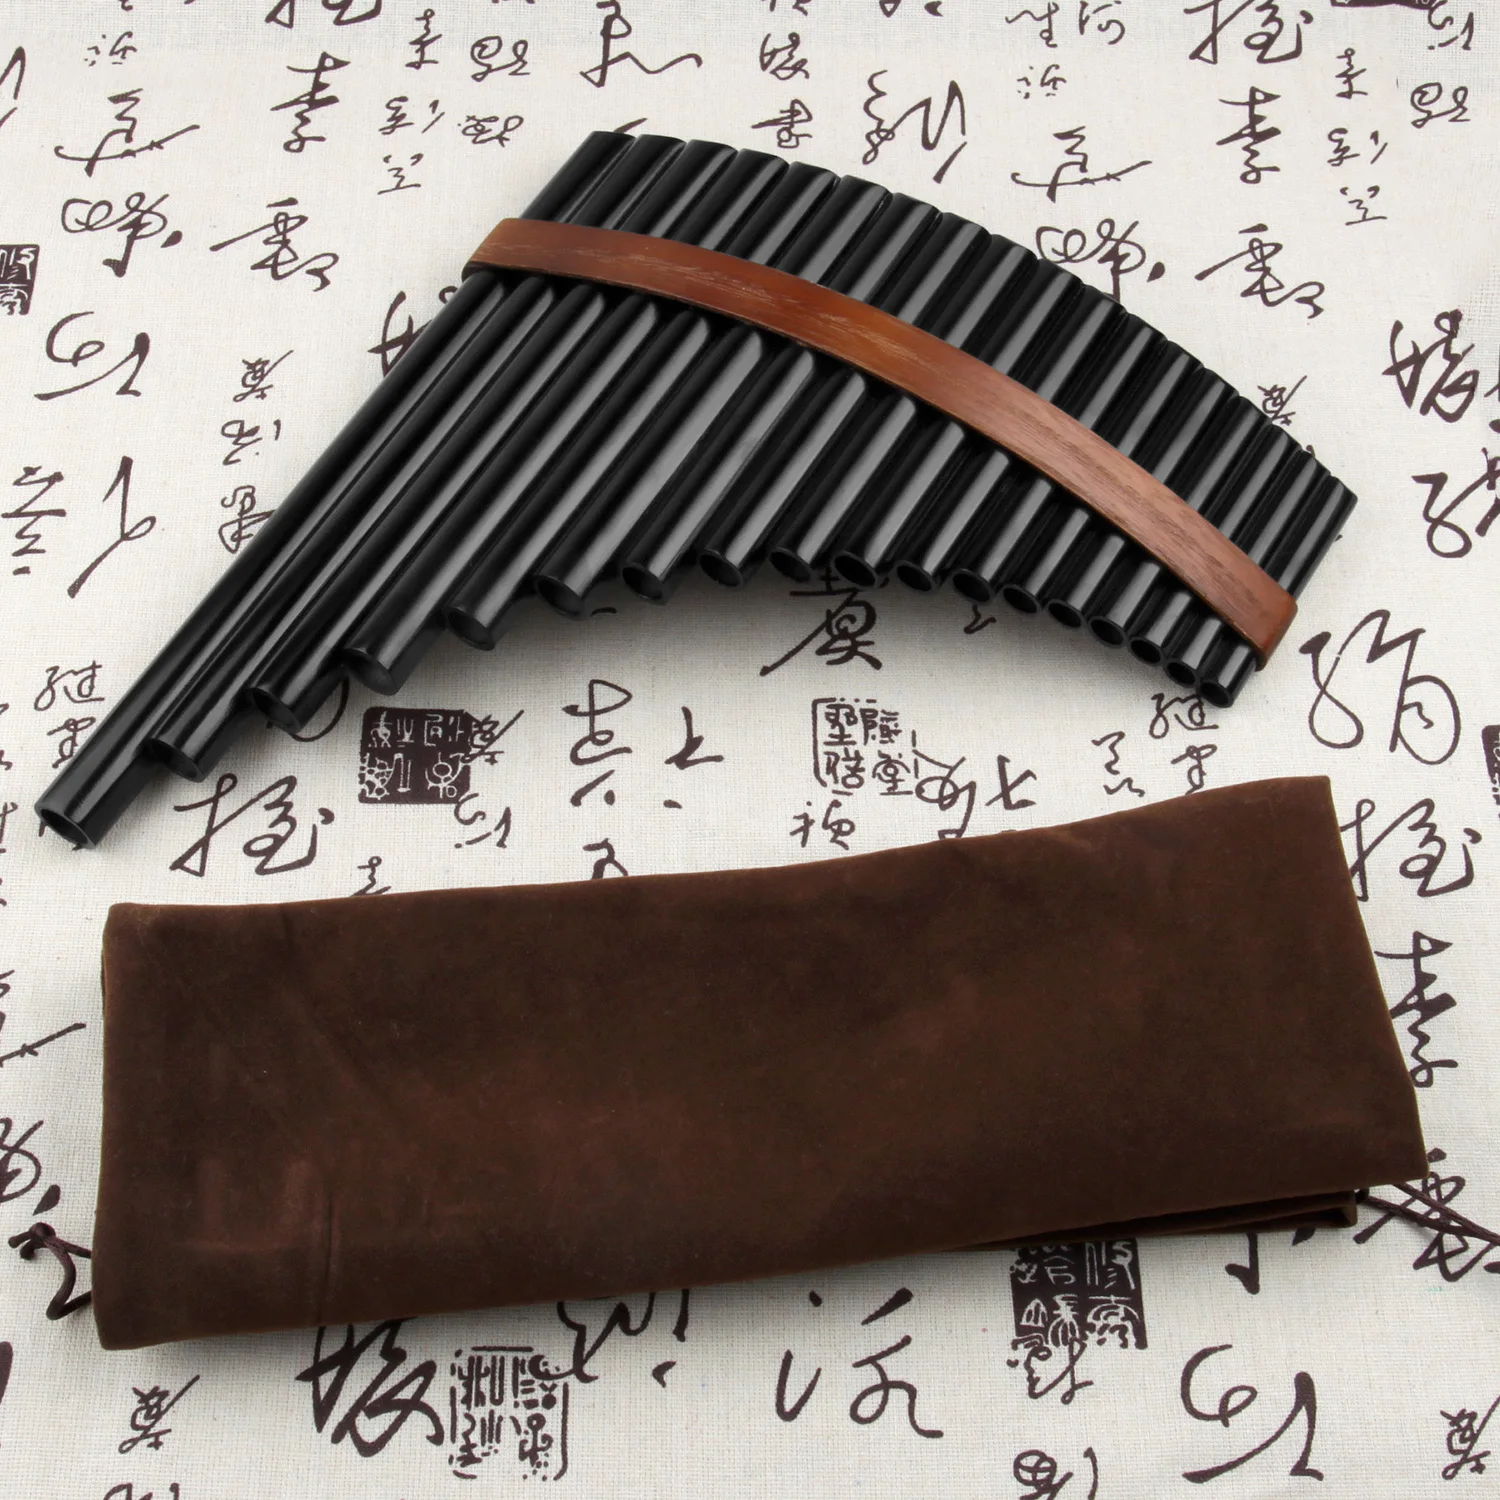 18 Pipes BrownPan Flute F Key High Quality Pan Pipes Woodwind Instrument Traditional Musical Instrument Bamboo Pan flute enlarge